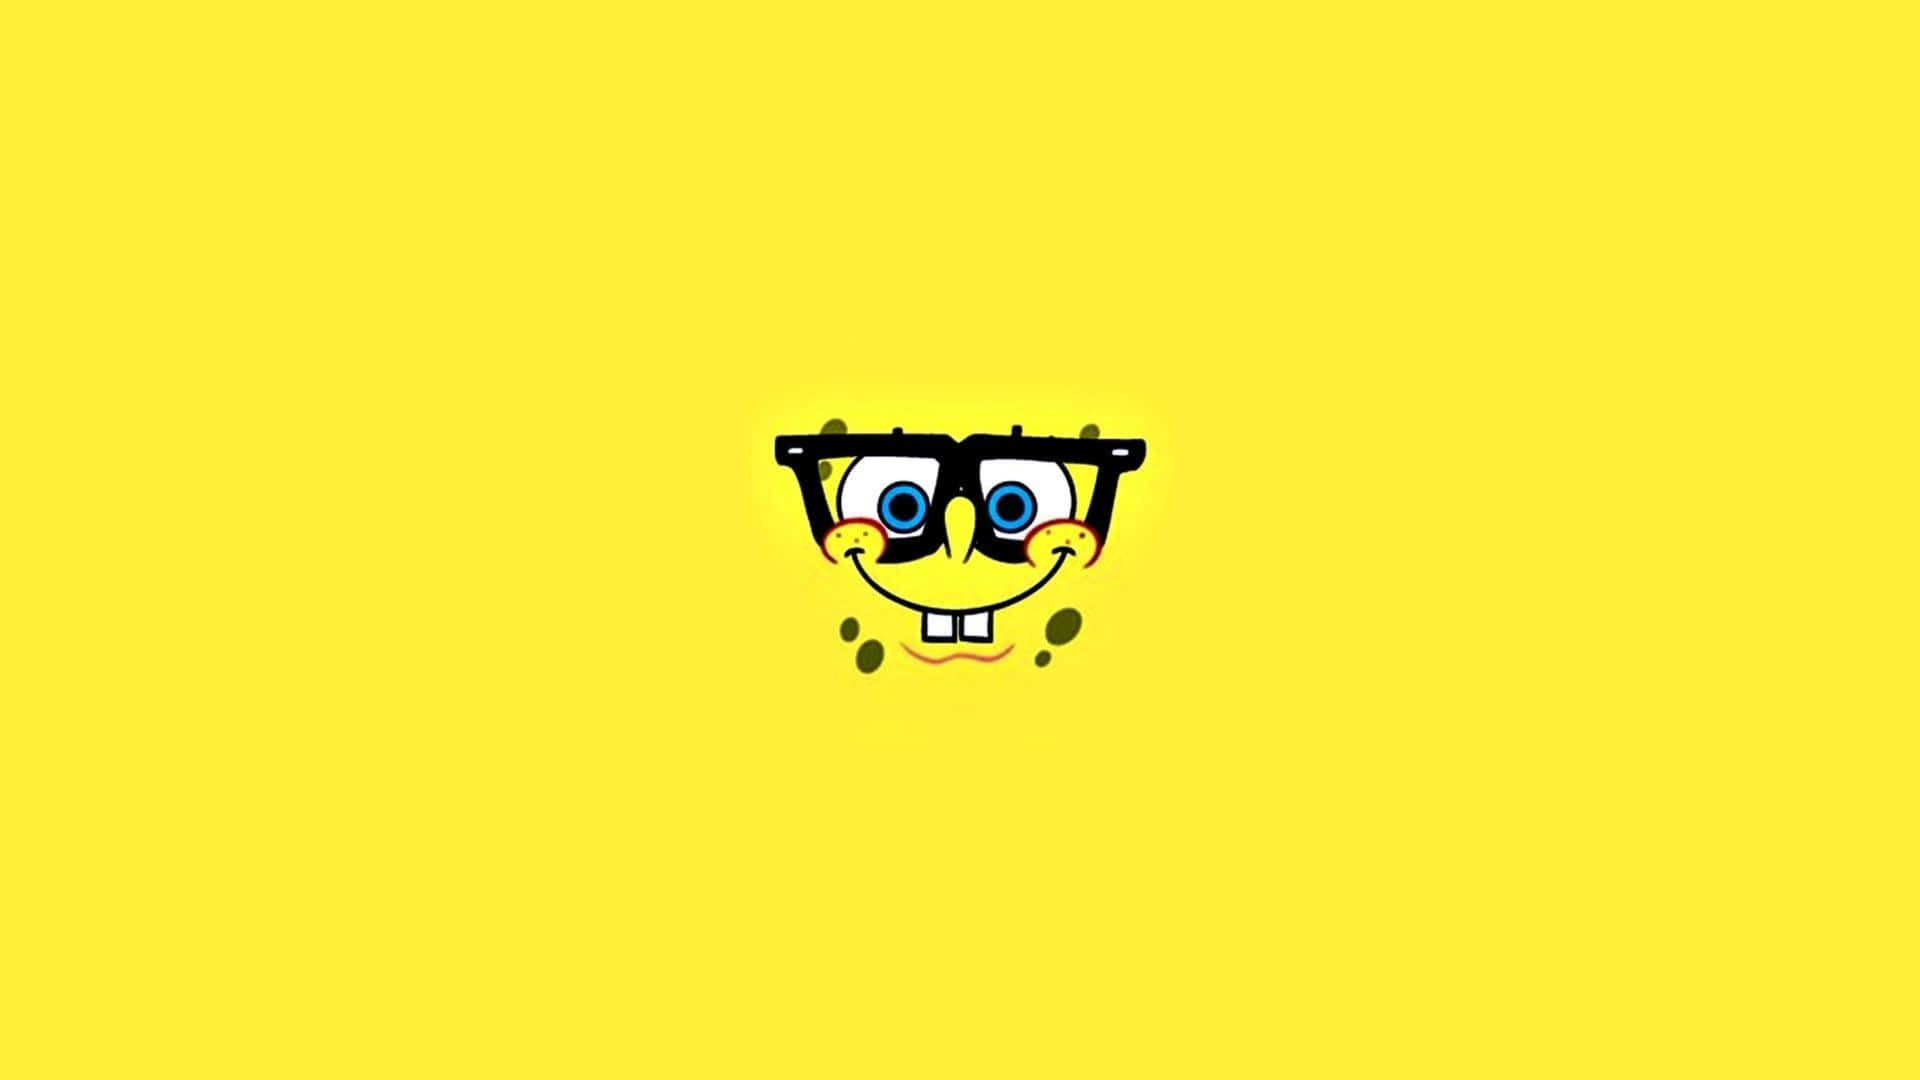 Bring some fun to your day with this cheerful Spongebob Face wallpaper! Wallpaper